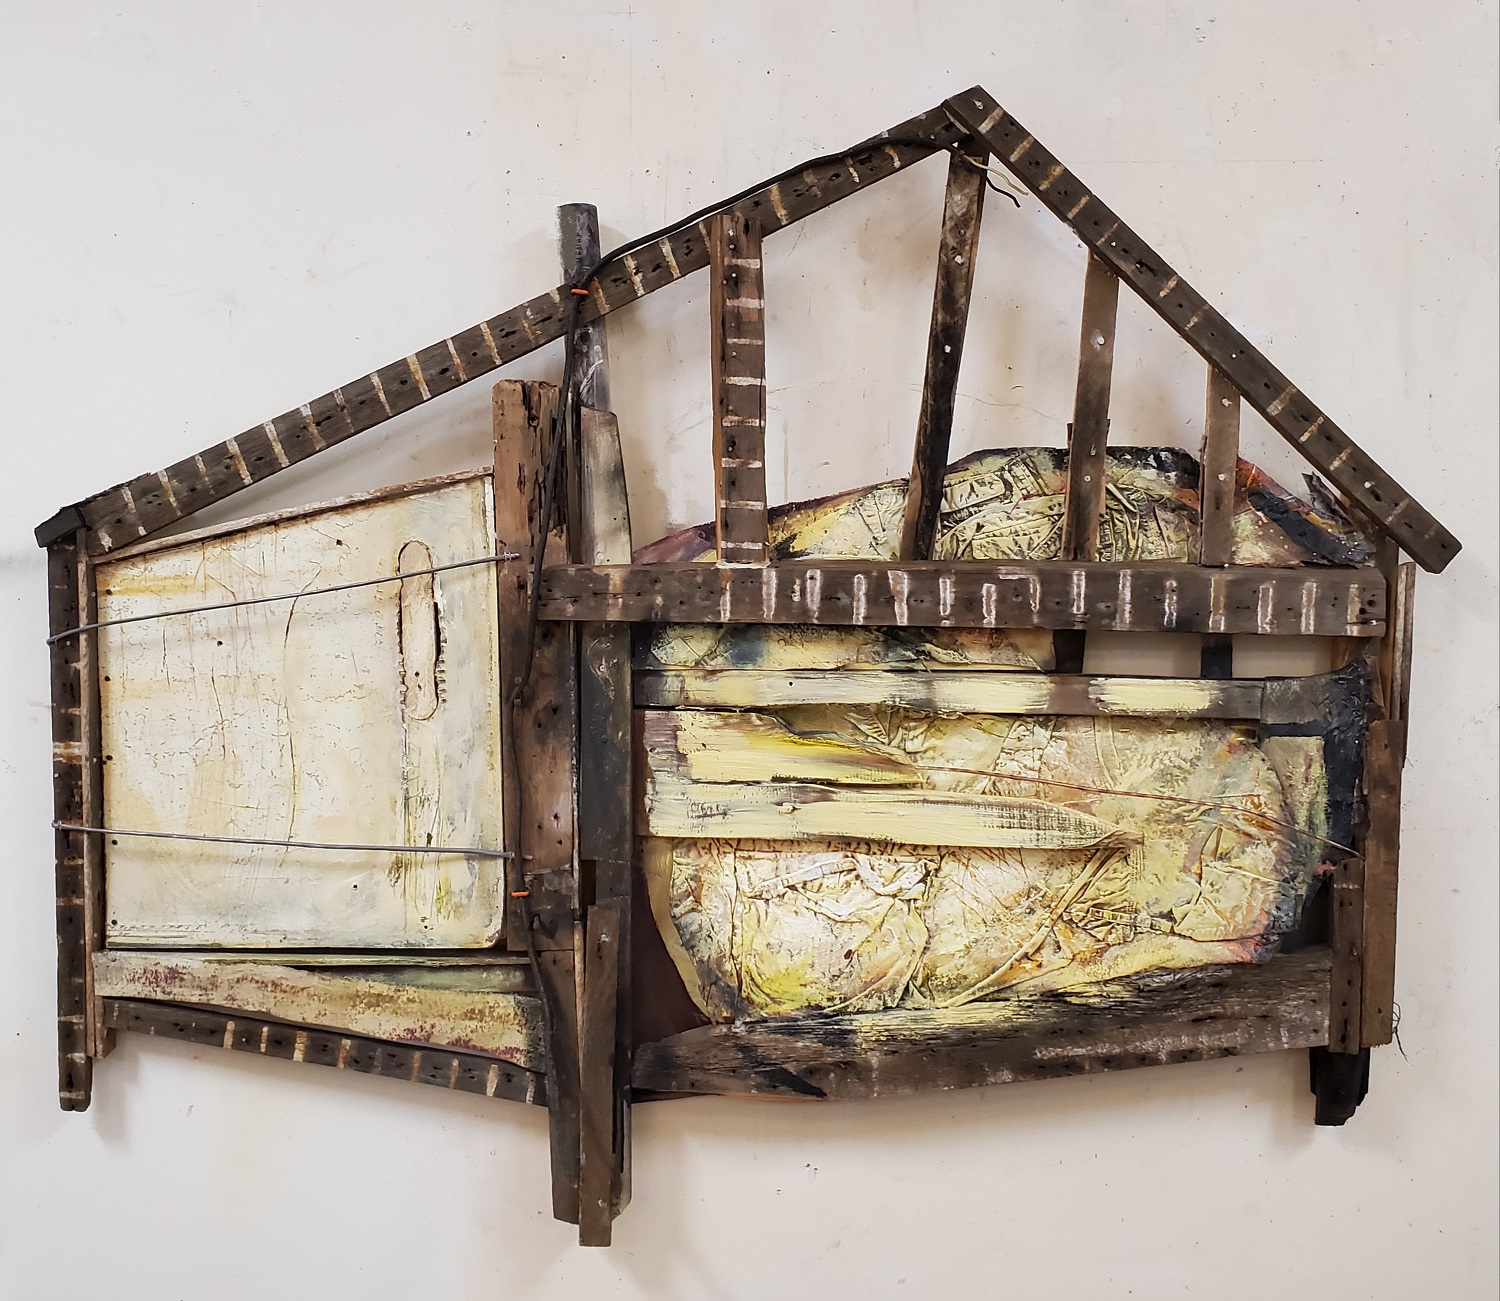 8. Richard Neal ''Shack Wacky'' oil, antique wood, copper, plastic, wire, and clothing 46X50'' 2020